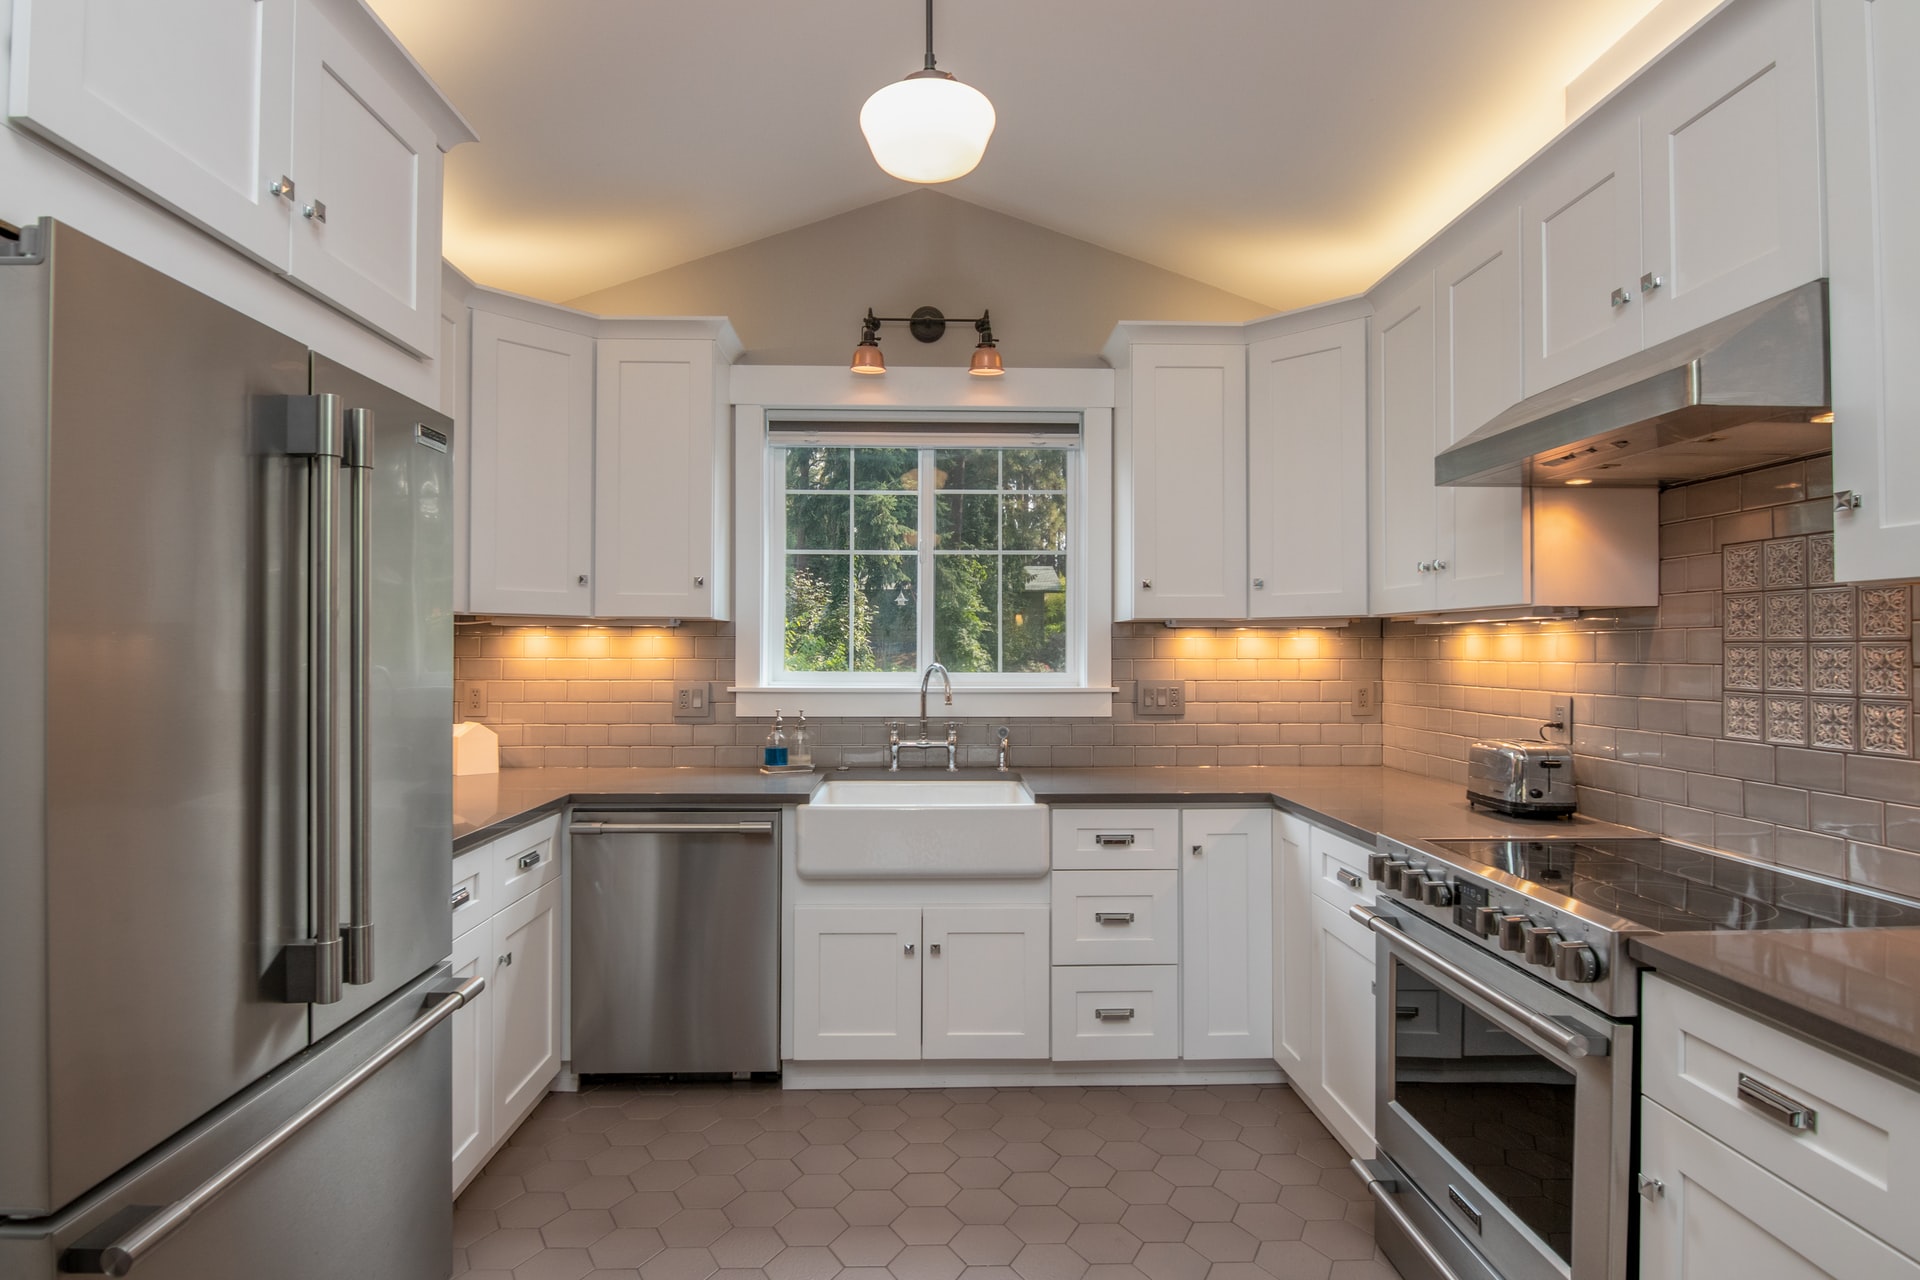 Kitchen remodel with white storage space and stainless steel appliances